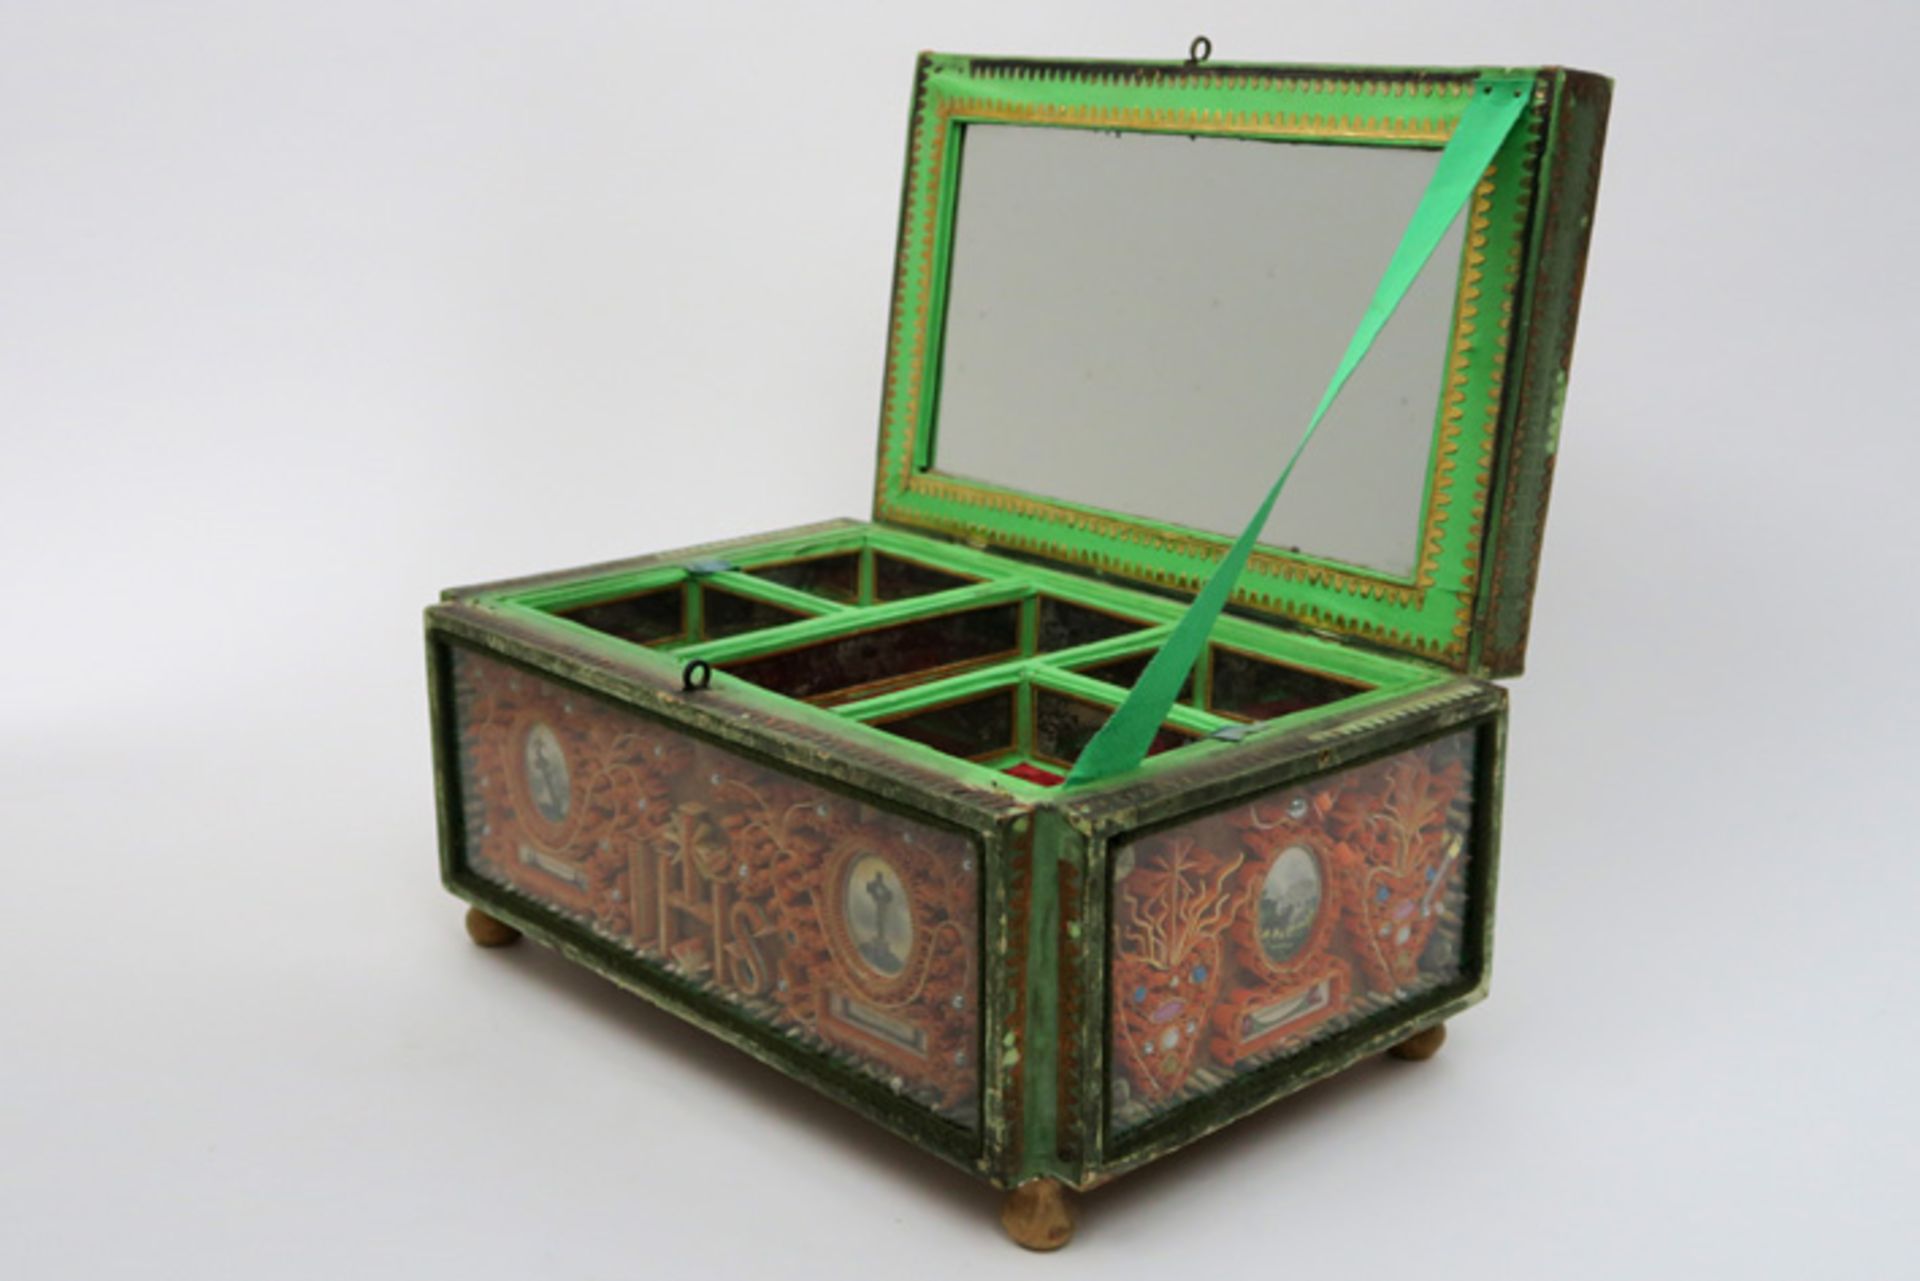 19th "Folk Art" box in painted wood and glass with relics VOLKSKUNST - 19° EEUW kistje in - Bild 2 aus 5